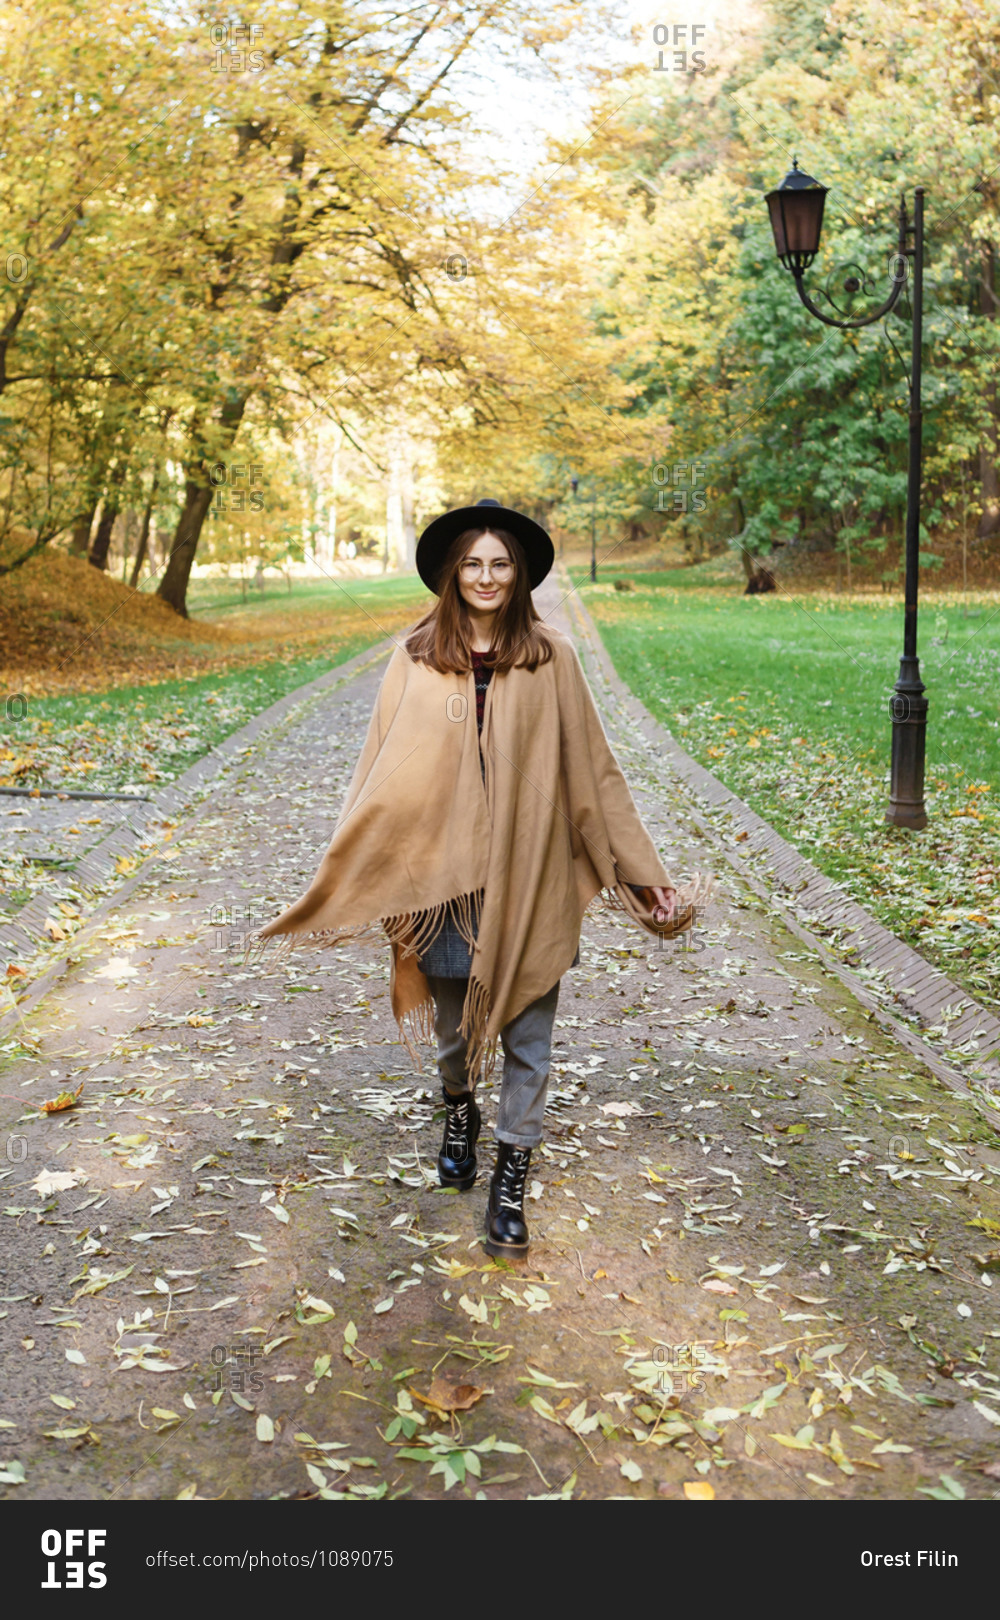 A young woman in a black hat and poncho is walking in the park in the autumn season